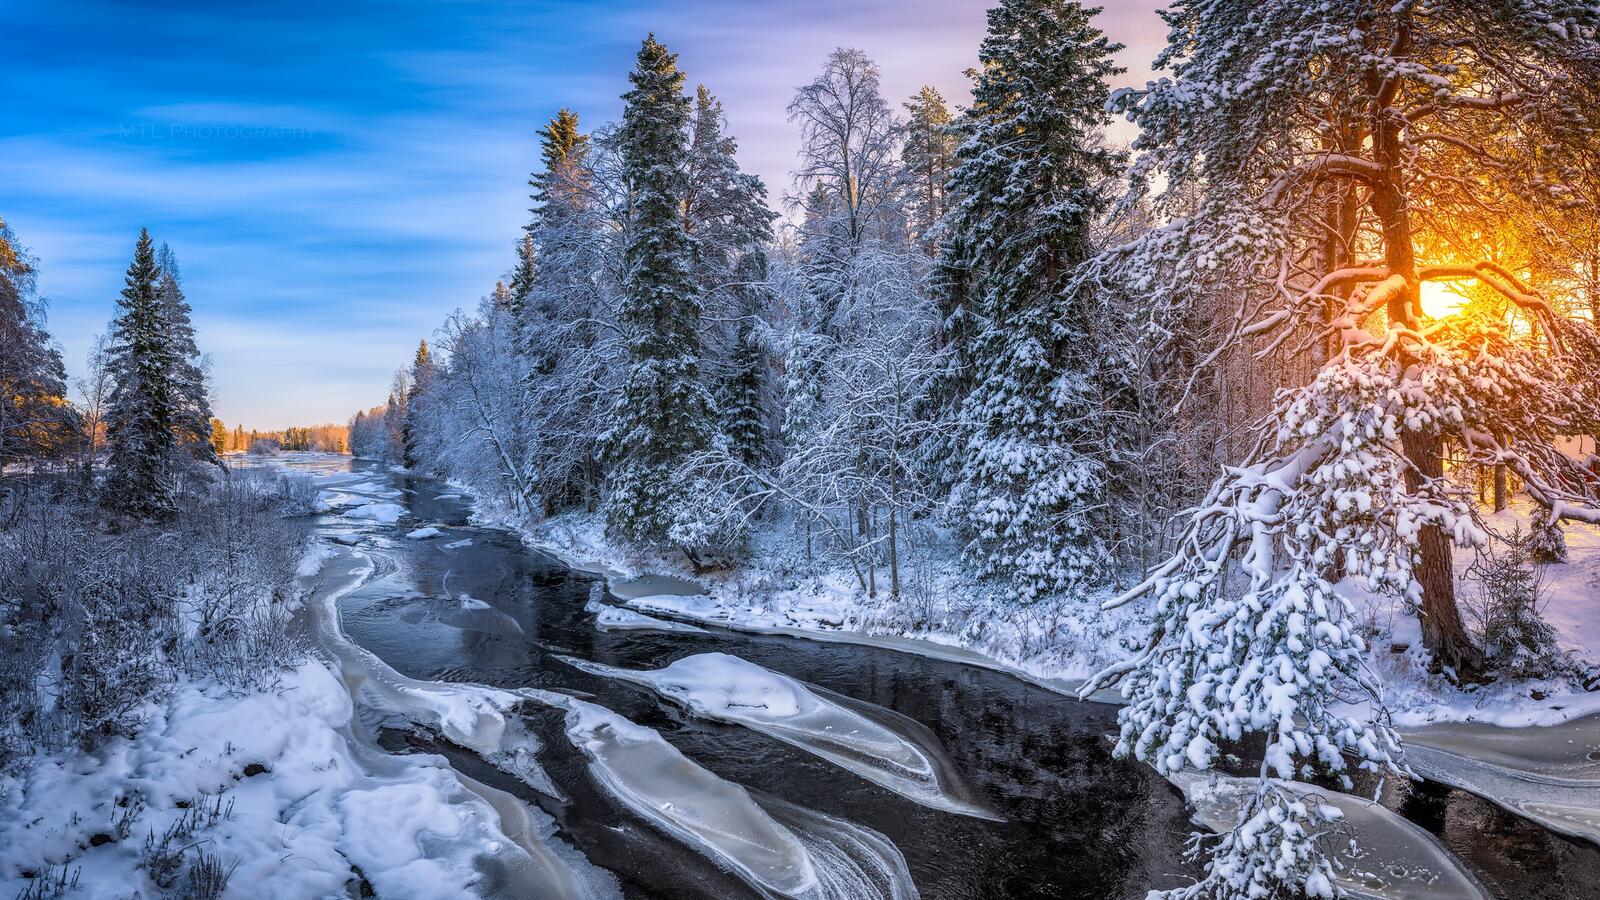 Free photo A creek with snow banks in the woods at sunset